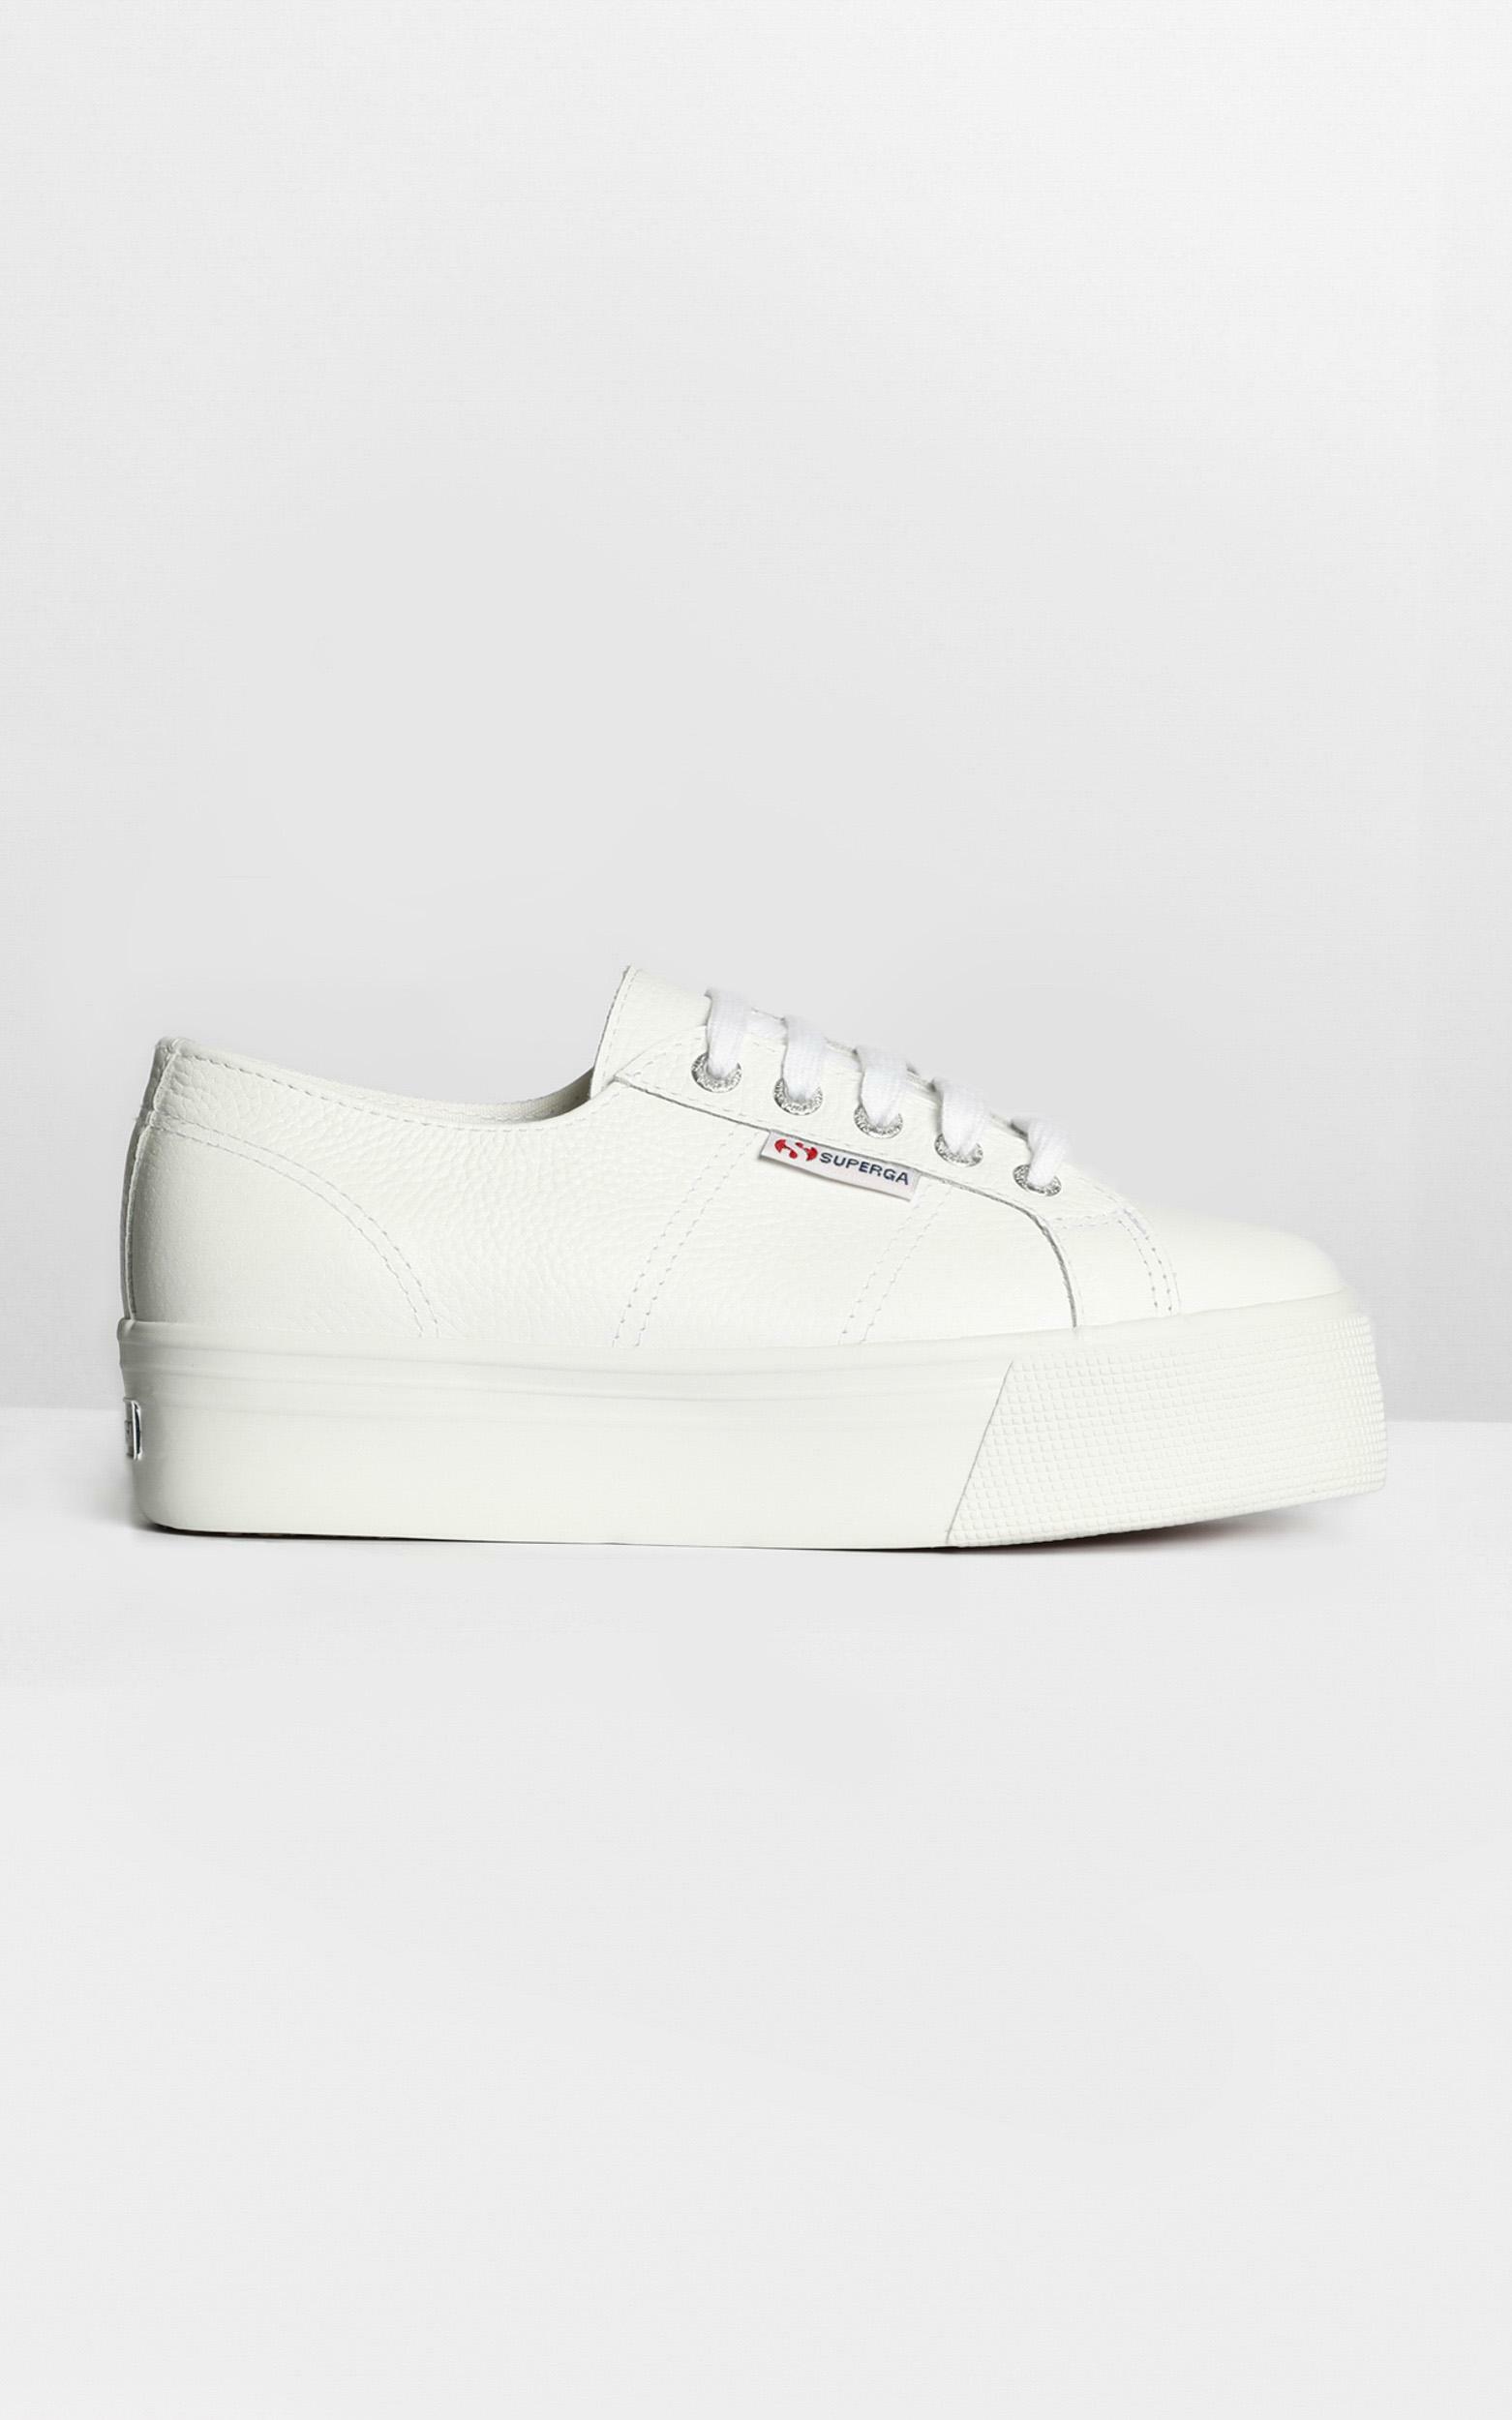 Superga - 2790 FGLW Platform Sneakers in White Leather - 09, WHT1, hi-res image number null